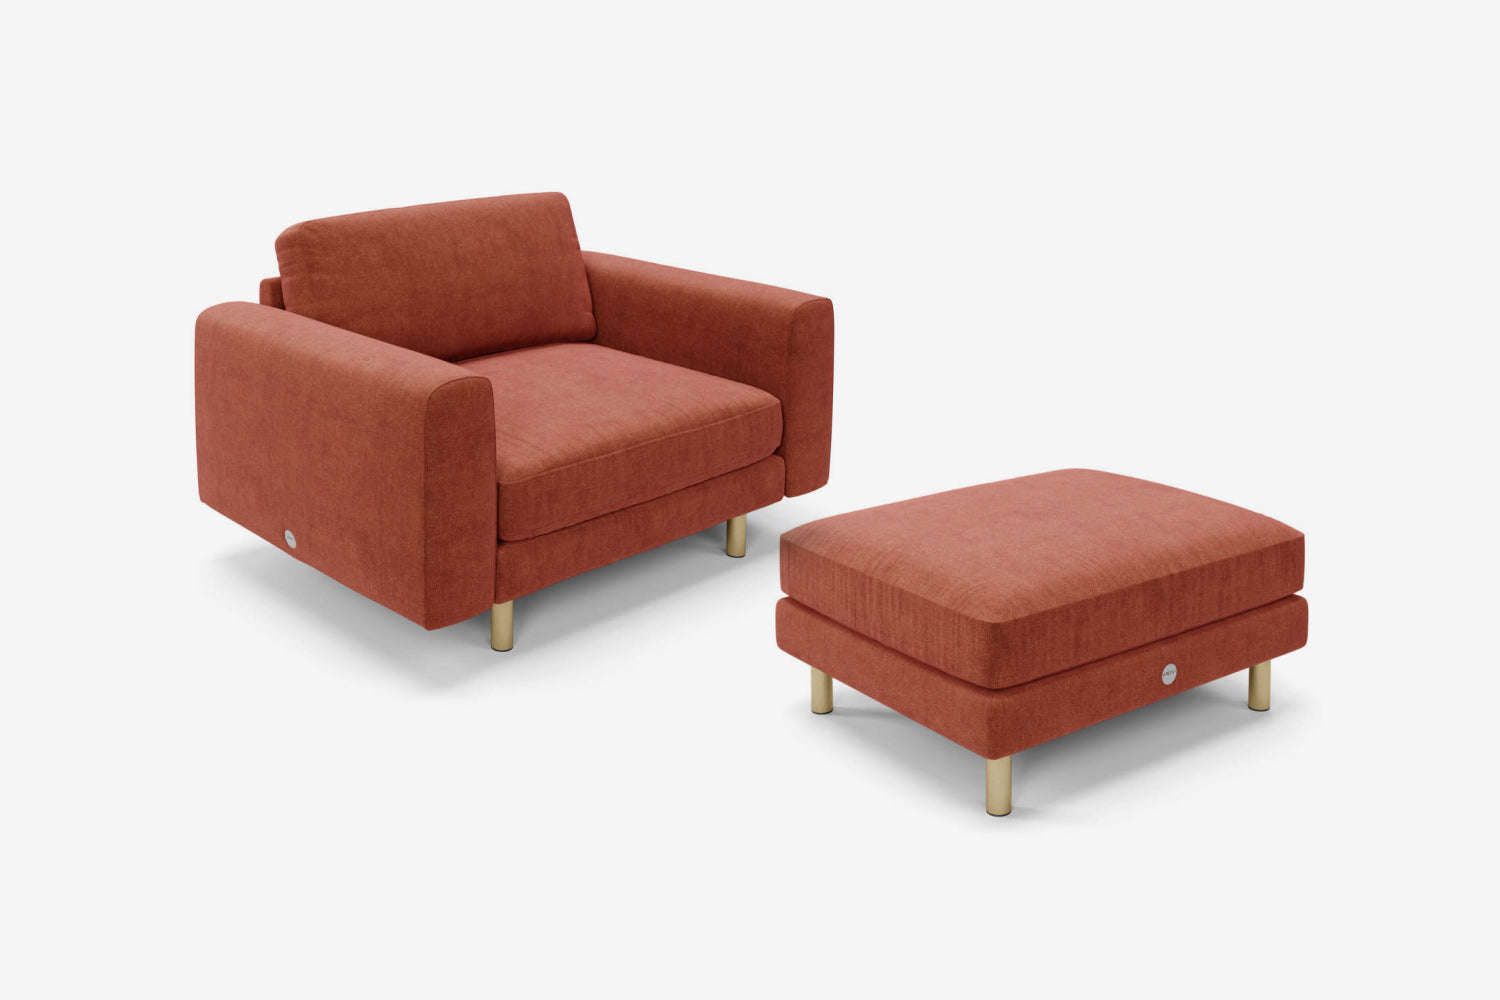 The Big Chill - 1.5 Seater Snuggler and Footstool Set - Spice